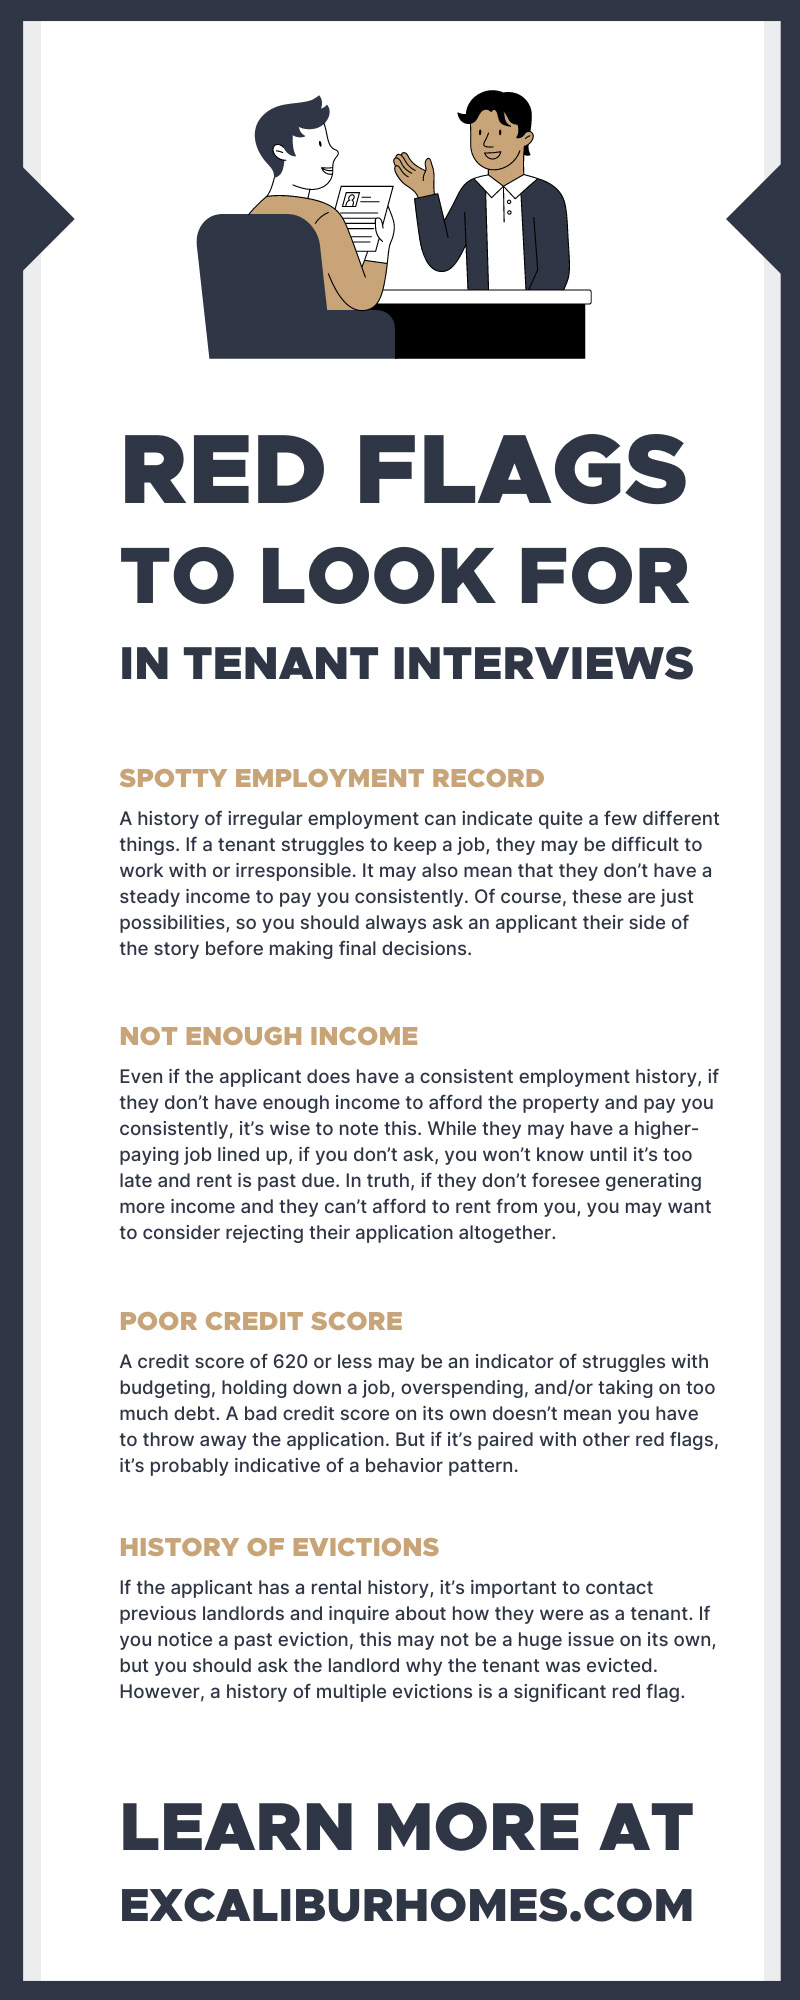 Red Flags To Look for in Tenant Interviews